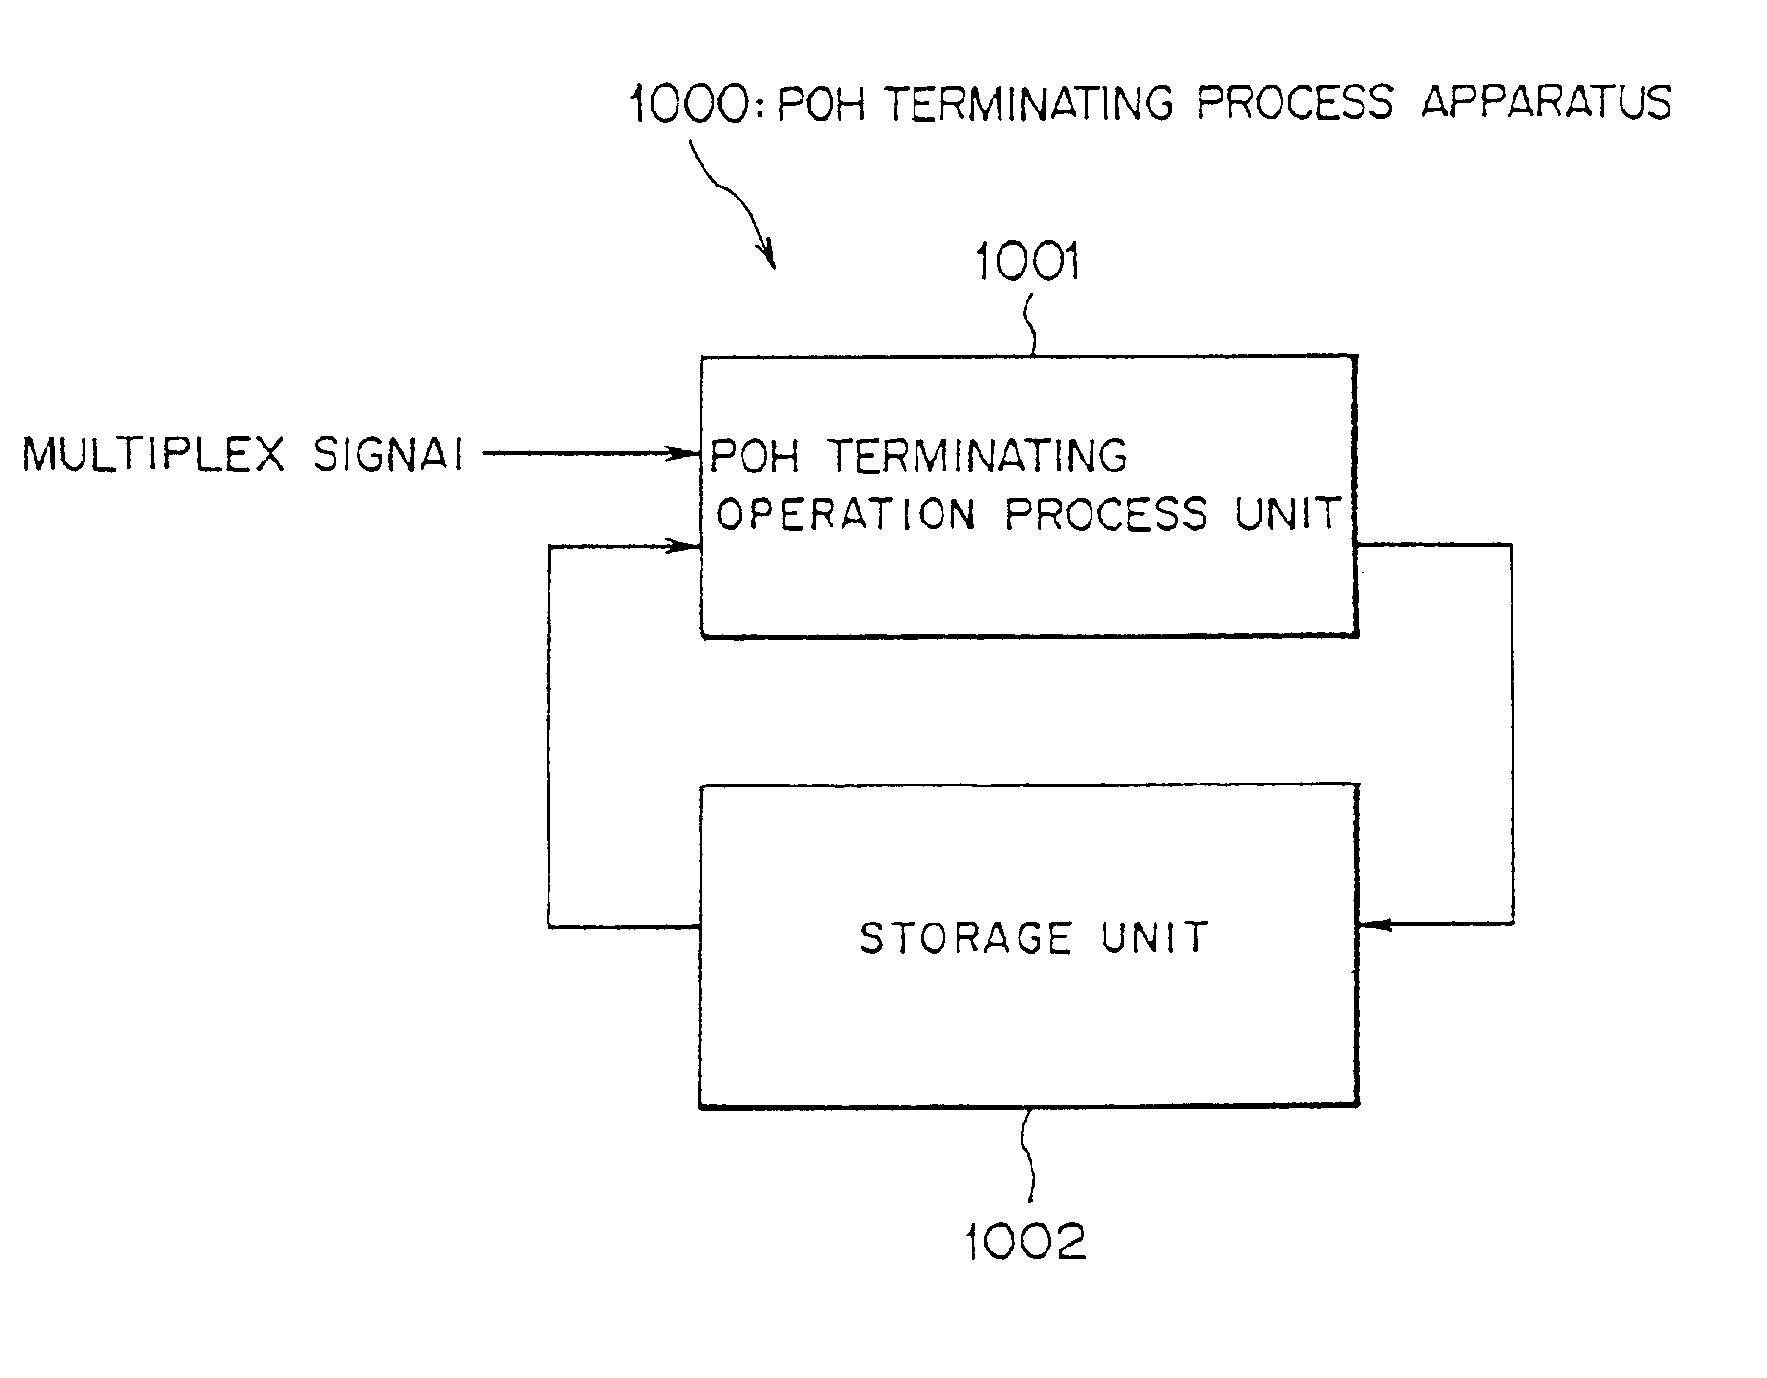 Pointer processing apparatus, POH terminating process apparatus, method of POH terminating process and pointer/POH terminating process apparatus in SDH transmission system